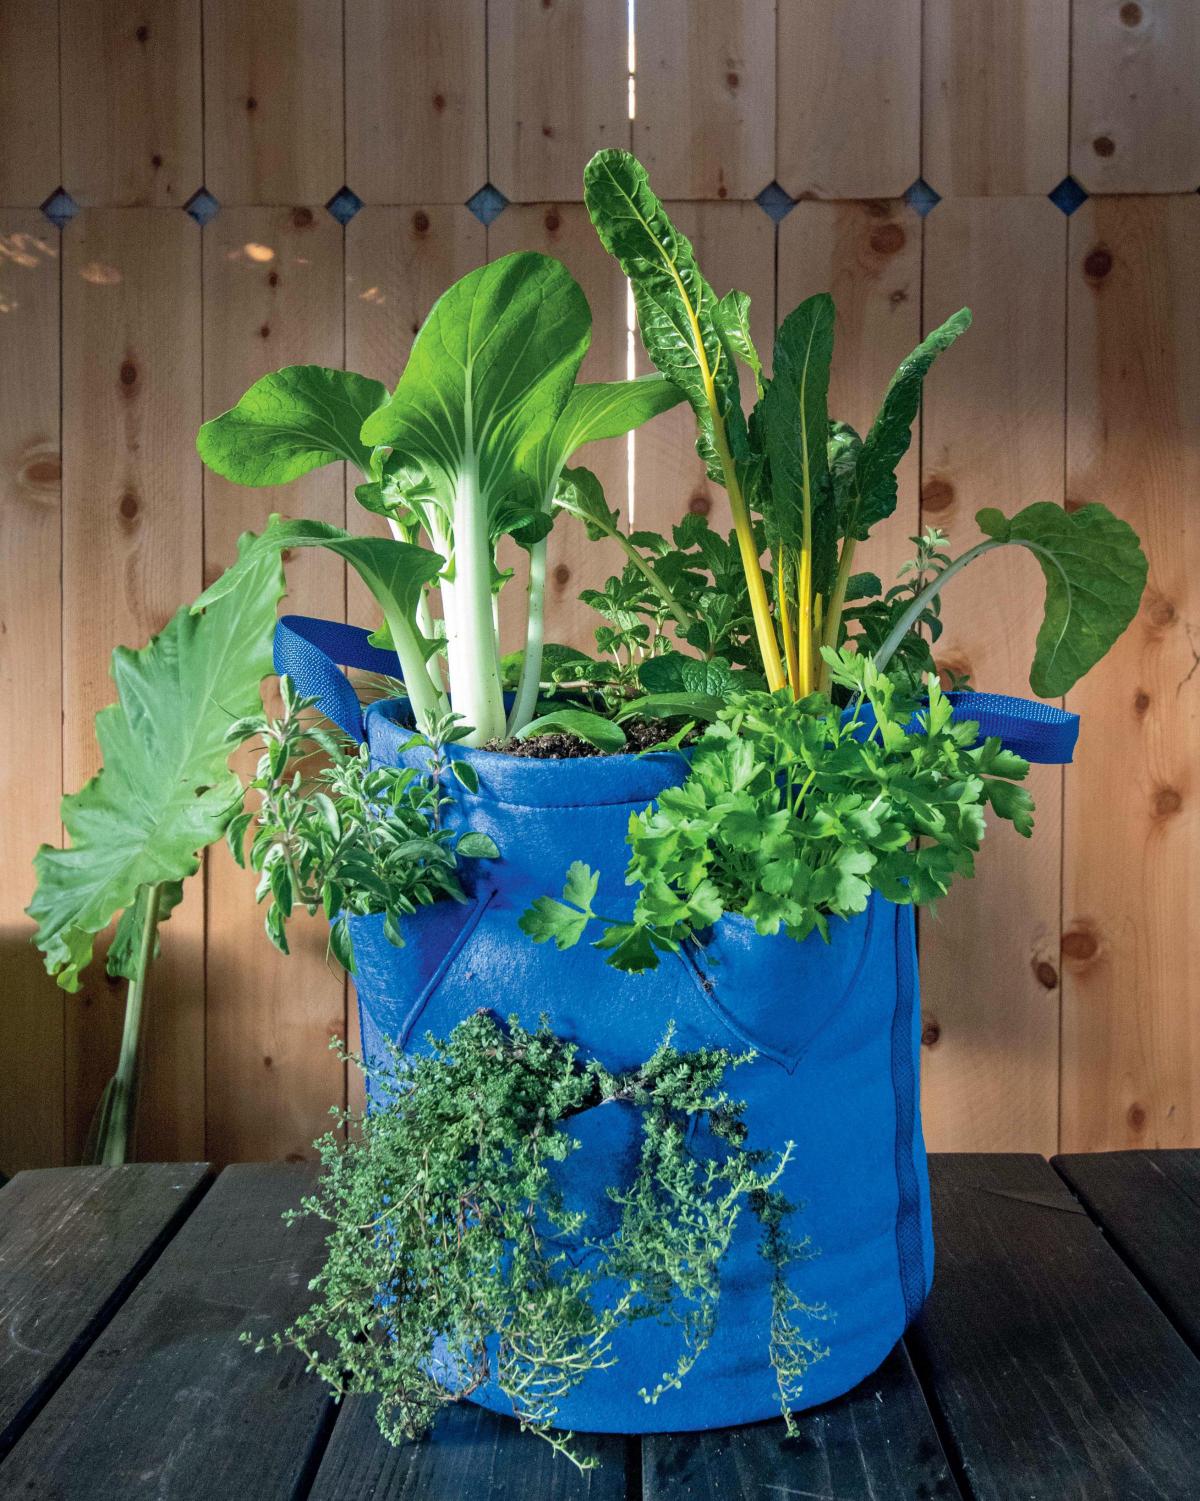 Gardening: Six imaginative ways to use grow bags in small spaces